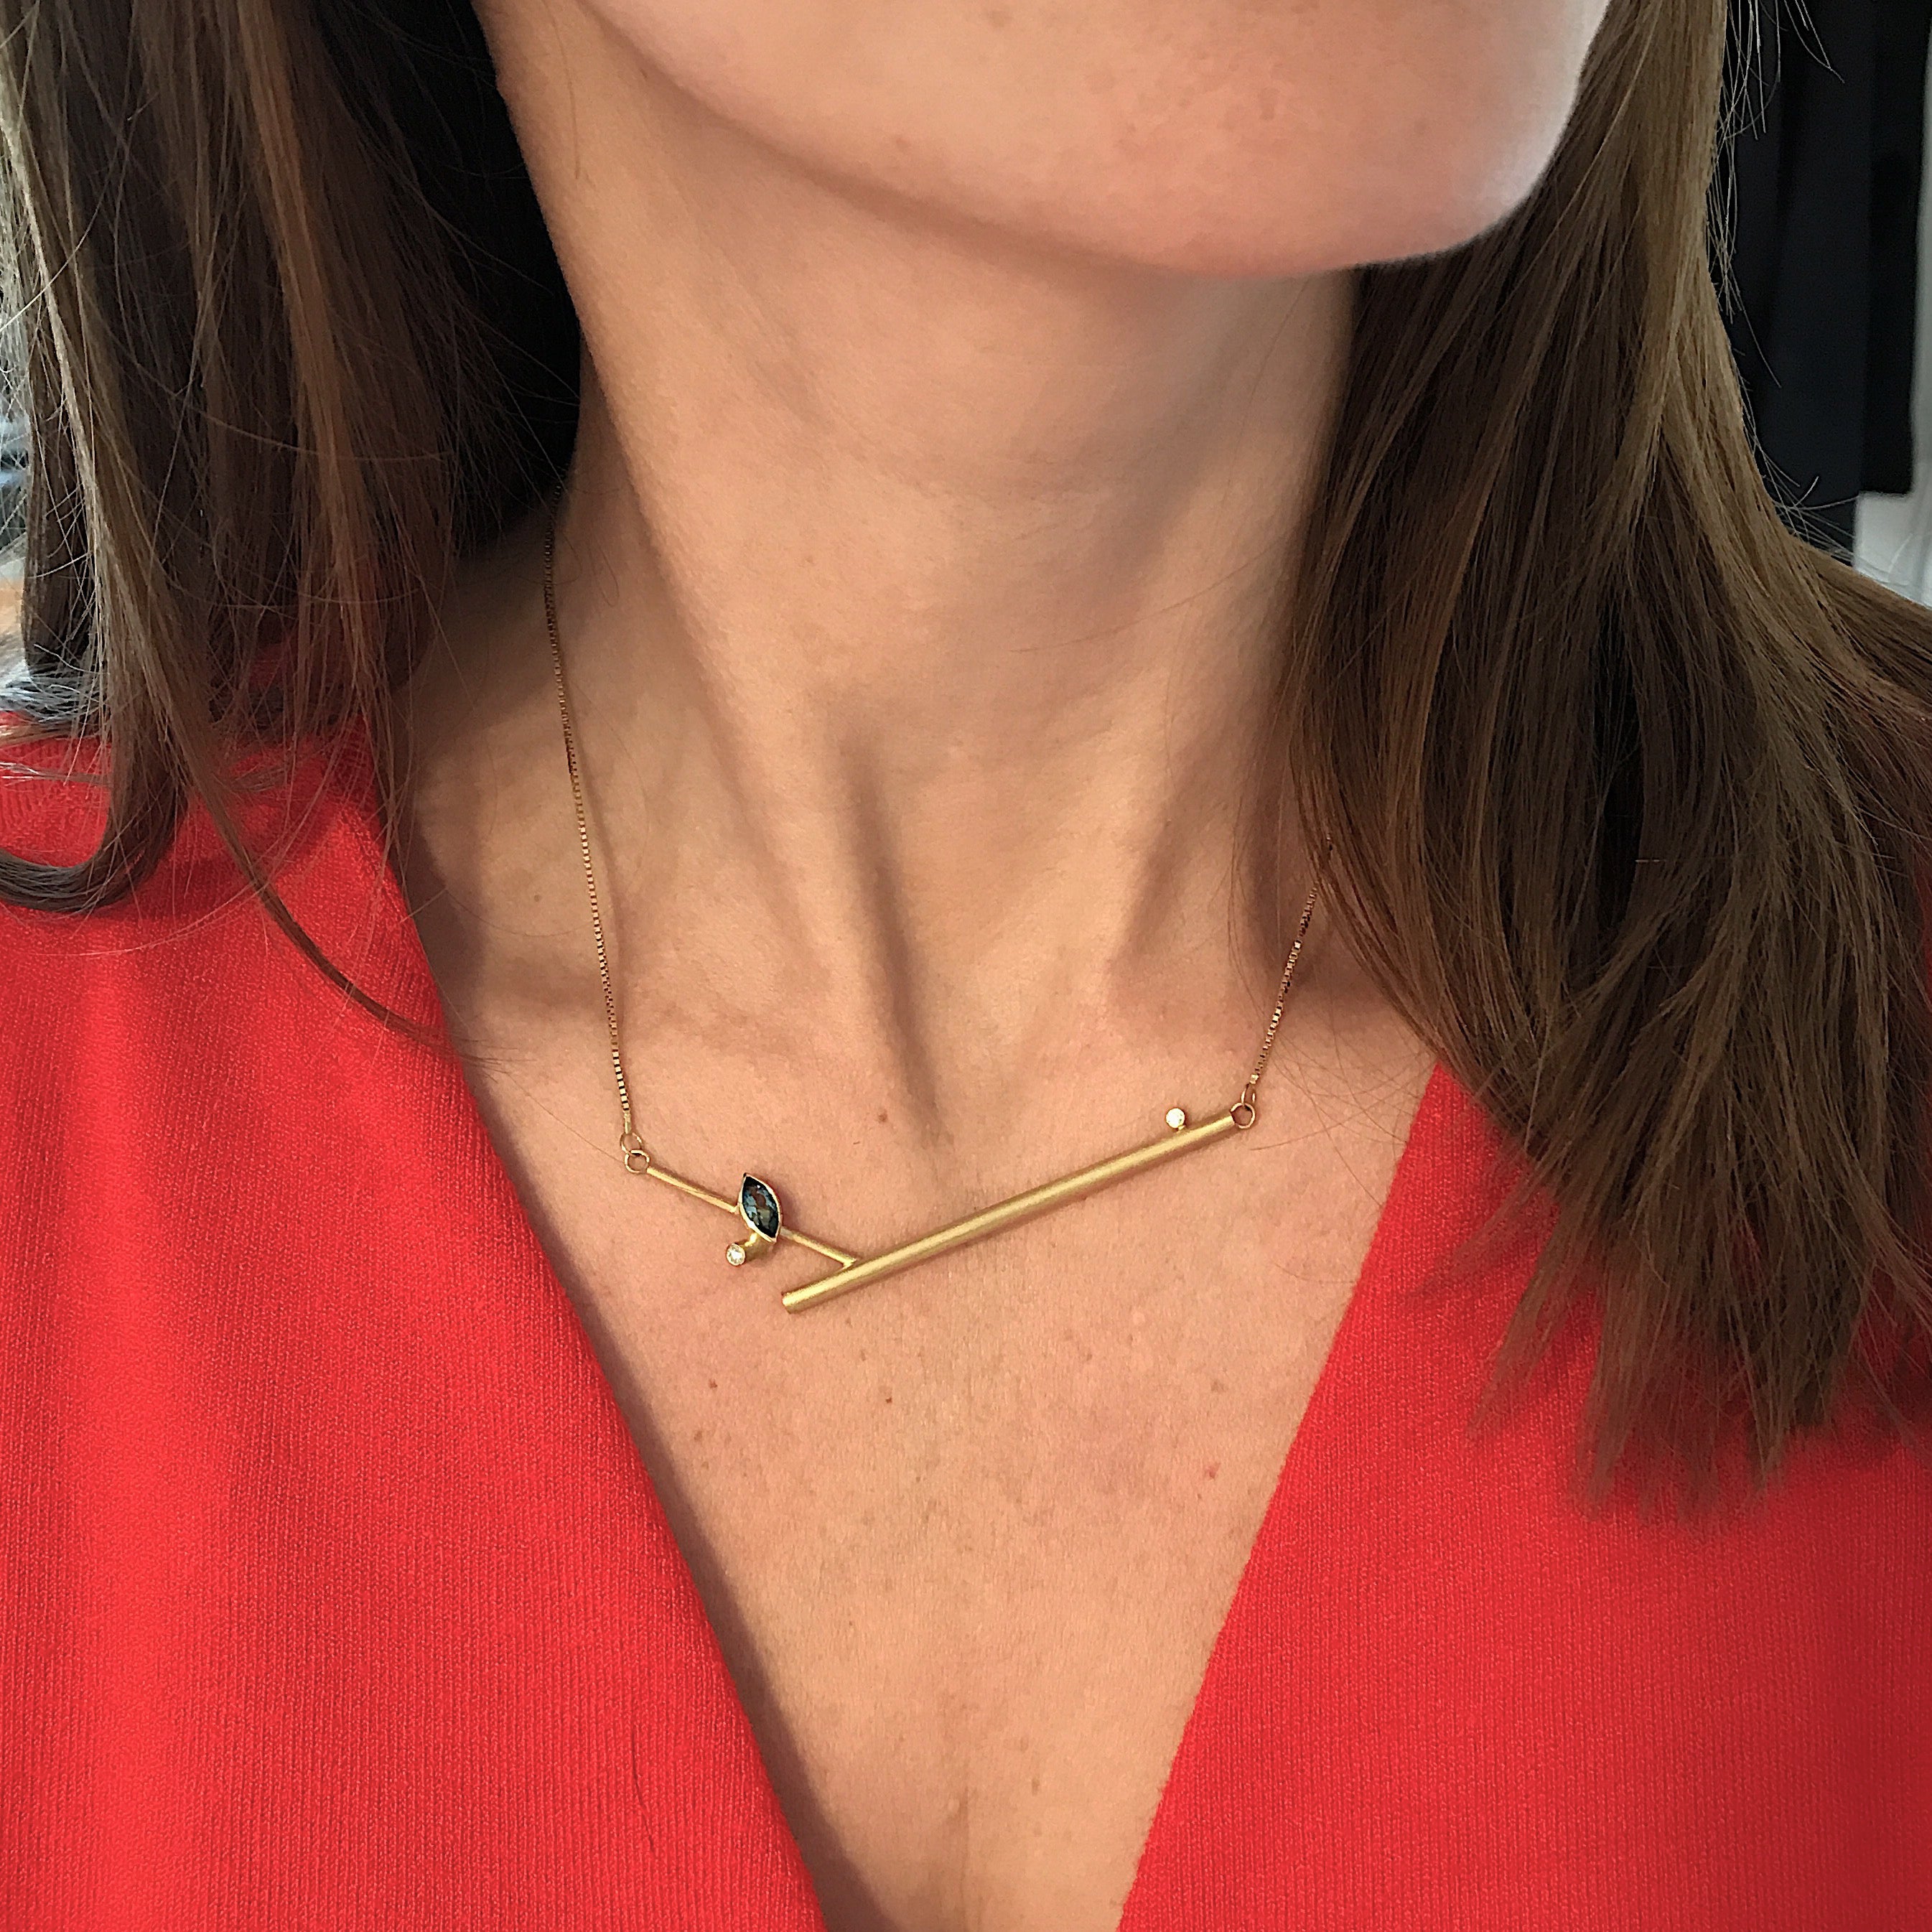 Contemporary, unique, bespoke and handmade 18ct yellow gold pendant